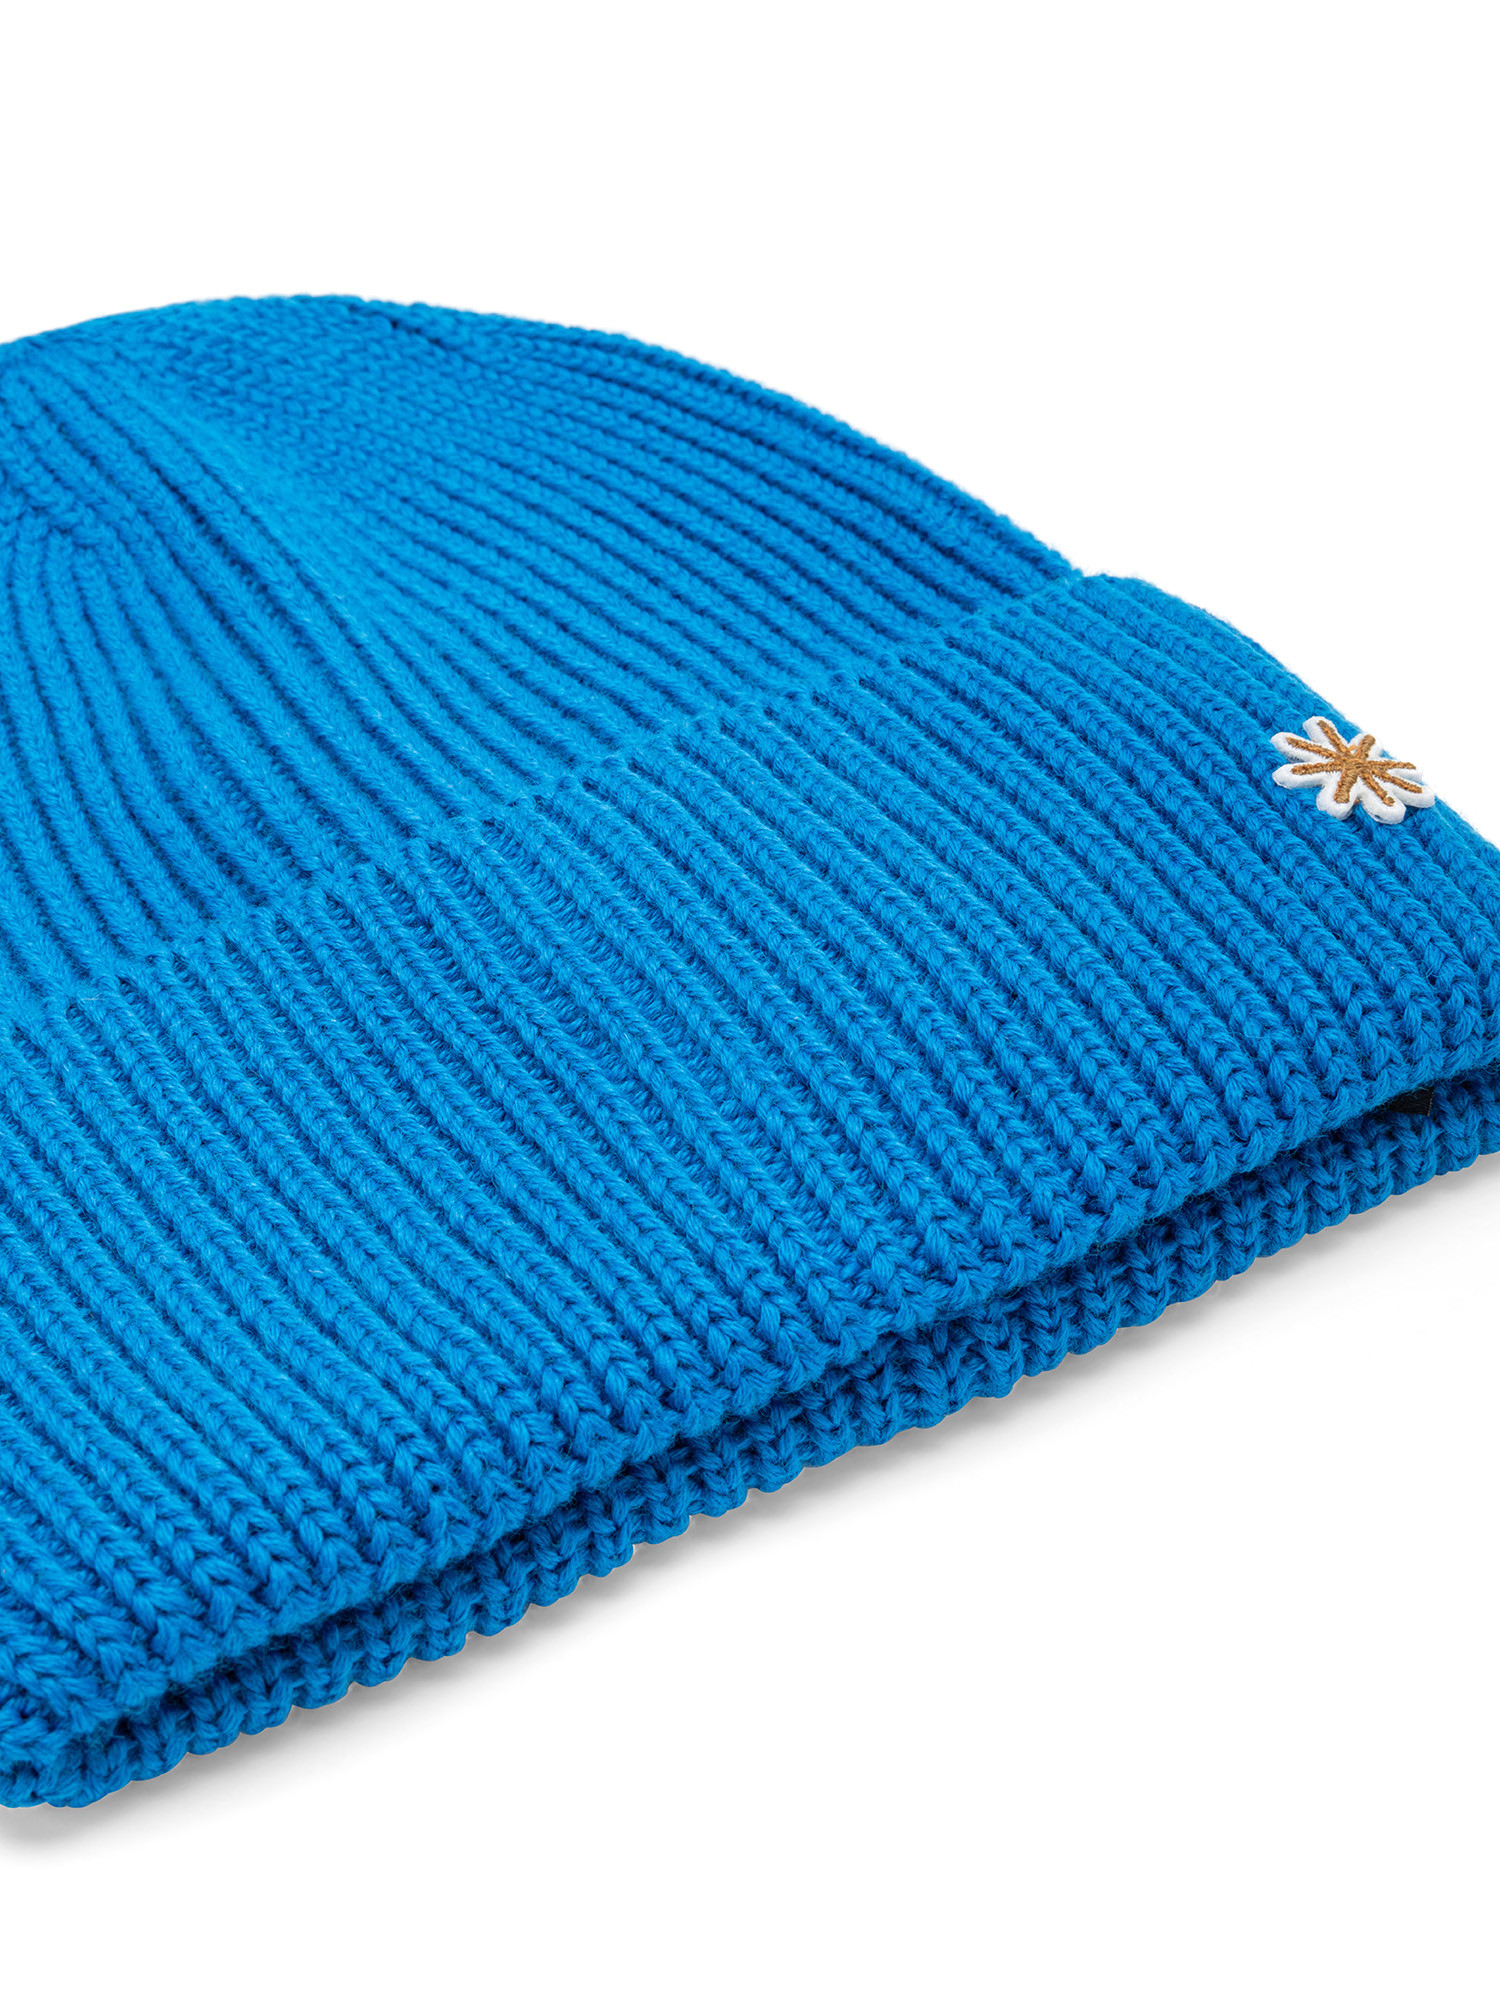 English purl Beanie, Blue, large image number 1